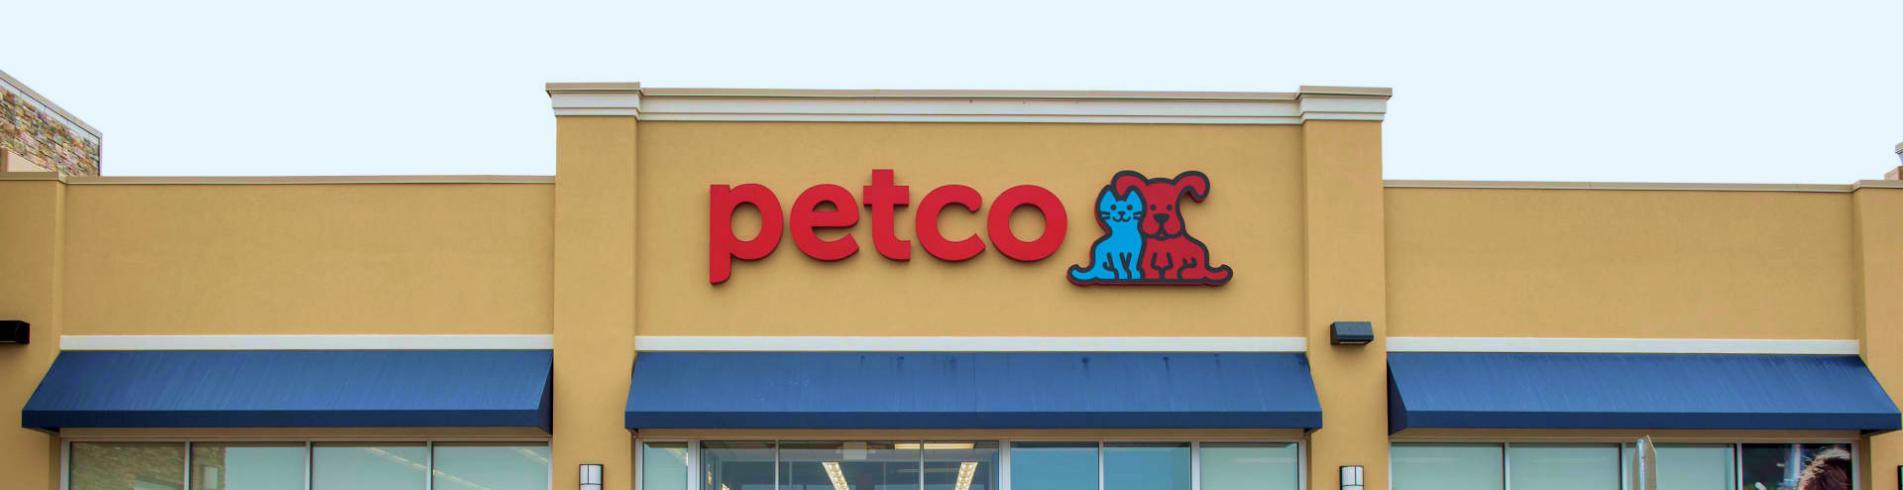 what time does Petco close